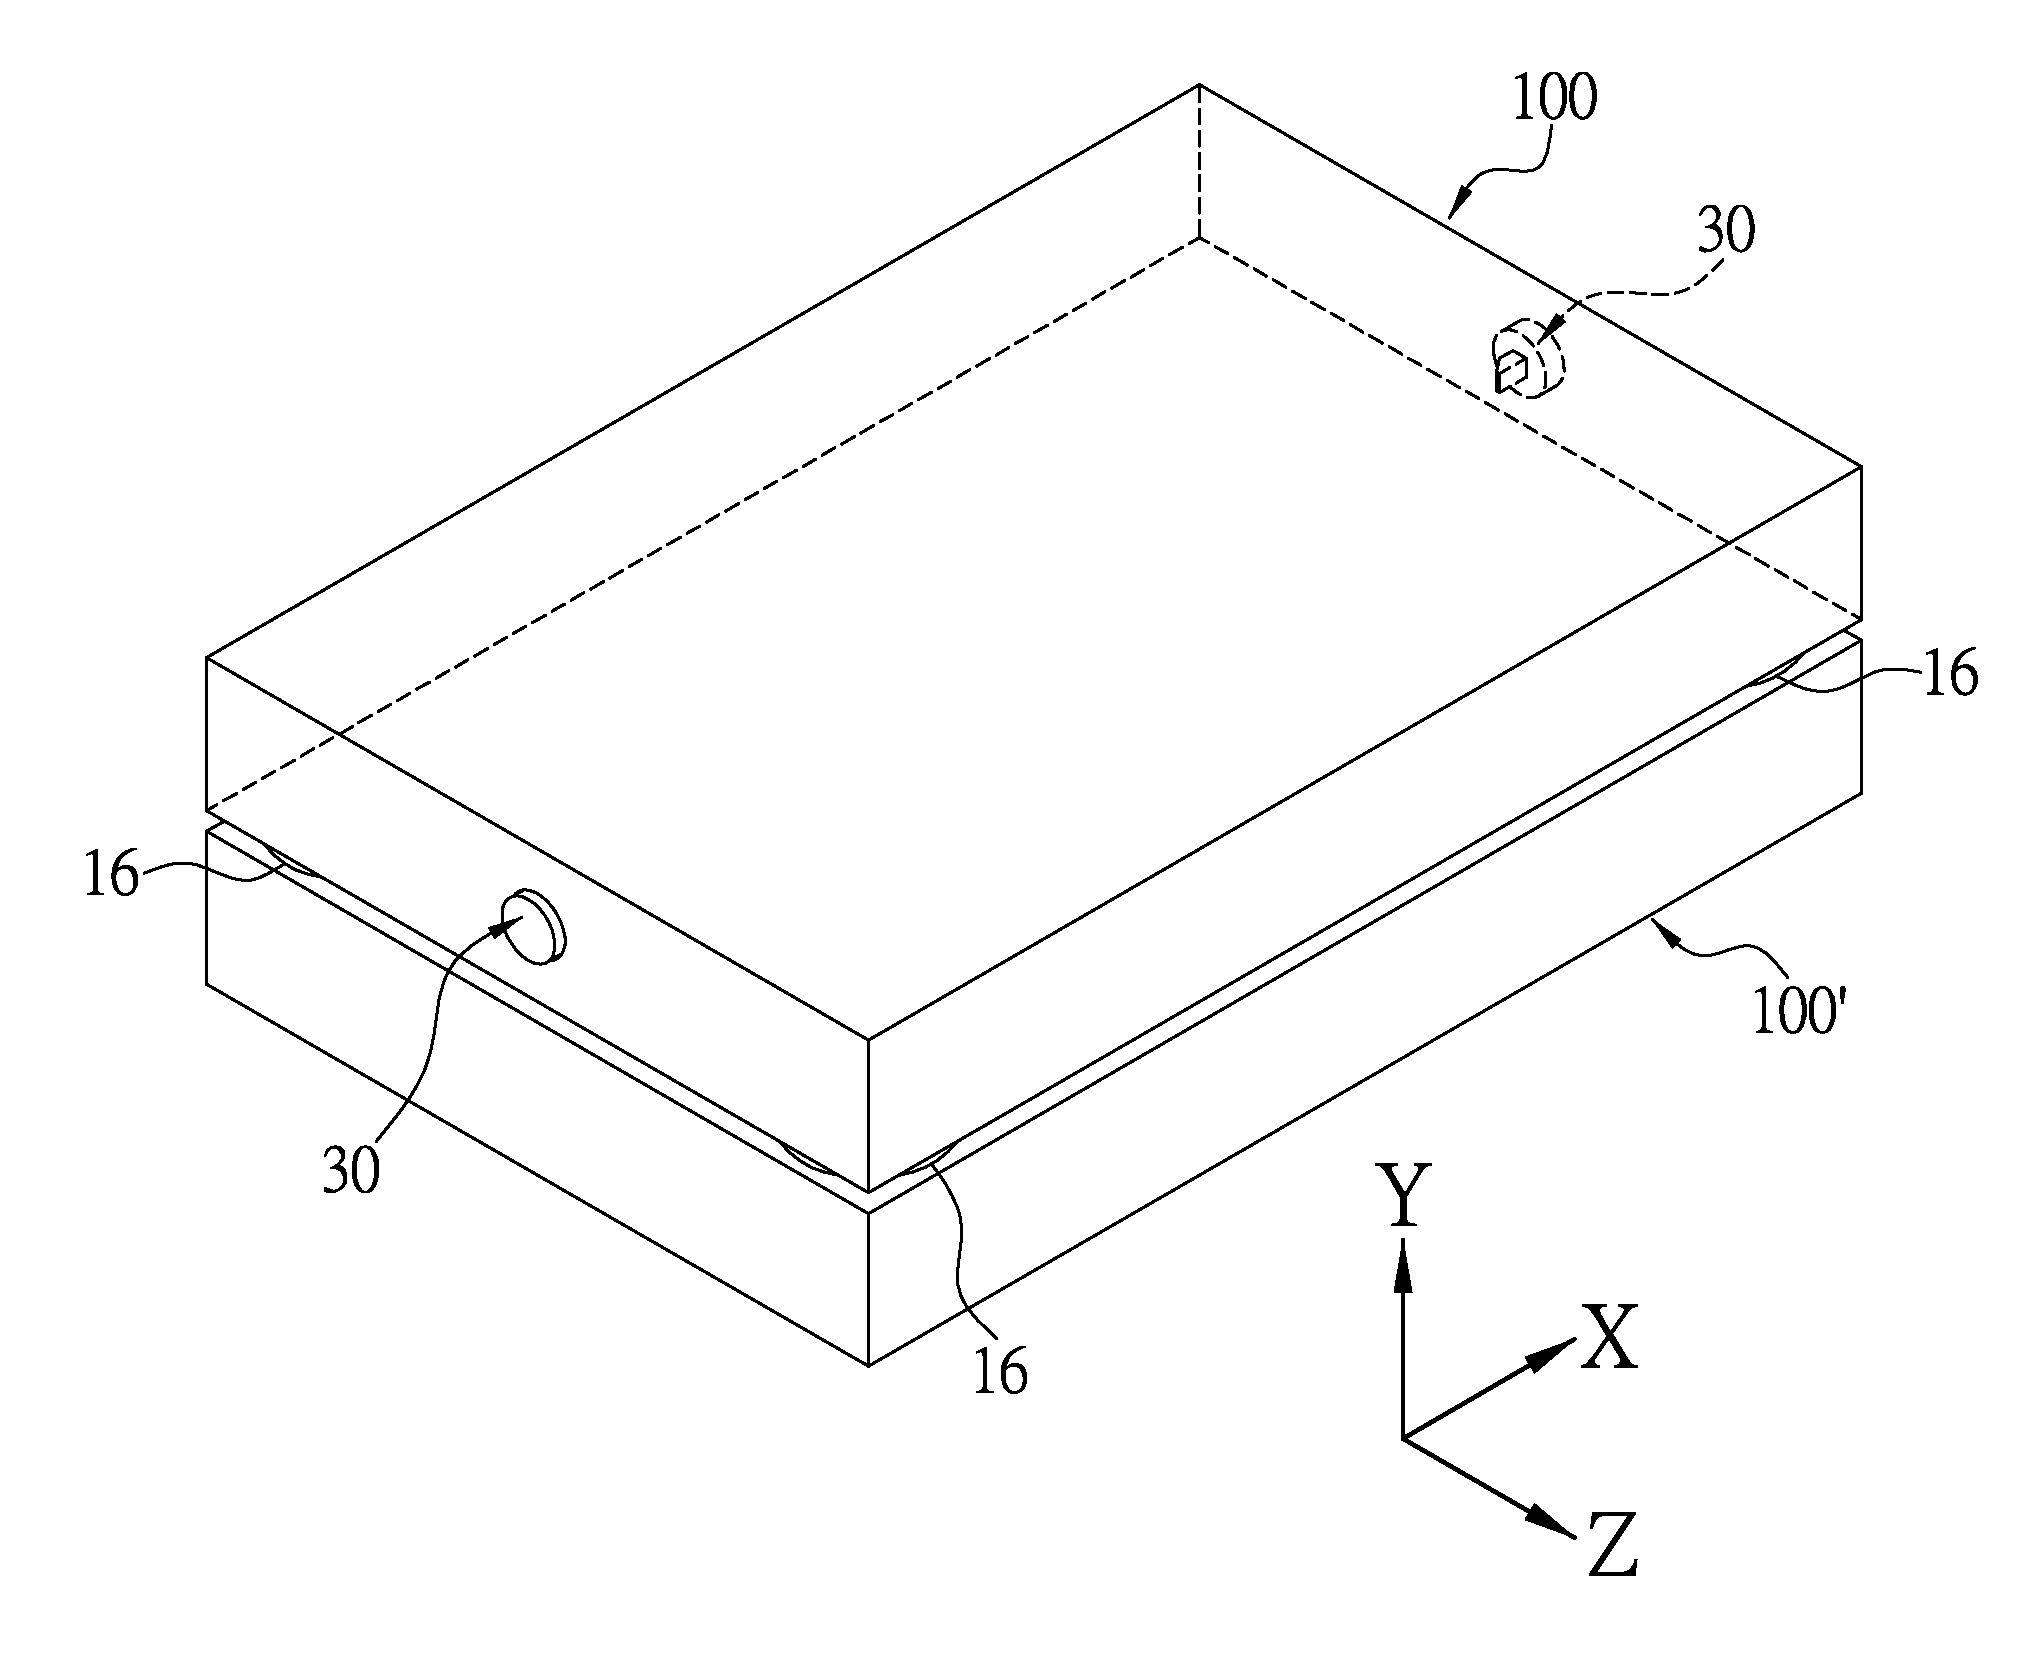 Electronic device with latching bumper, latching bumper thereof, and stackable electronic device system